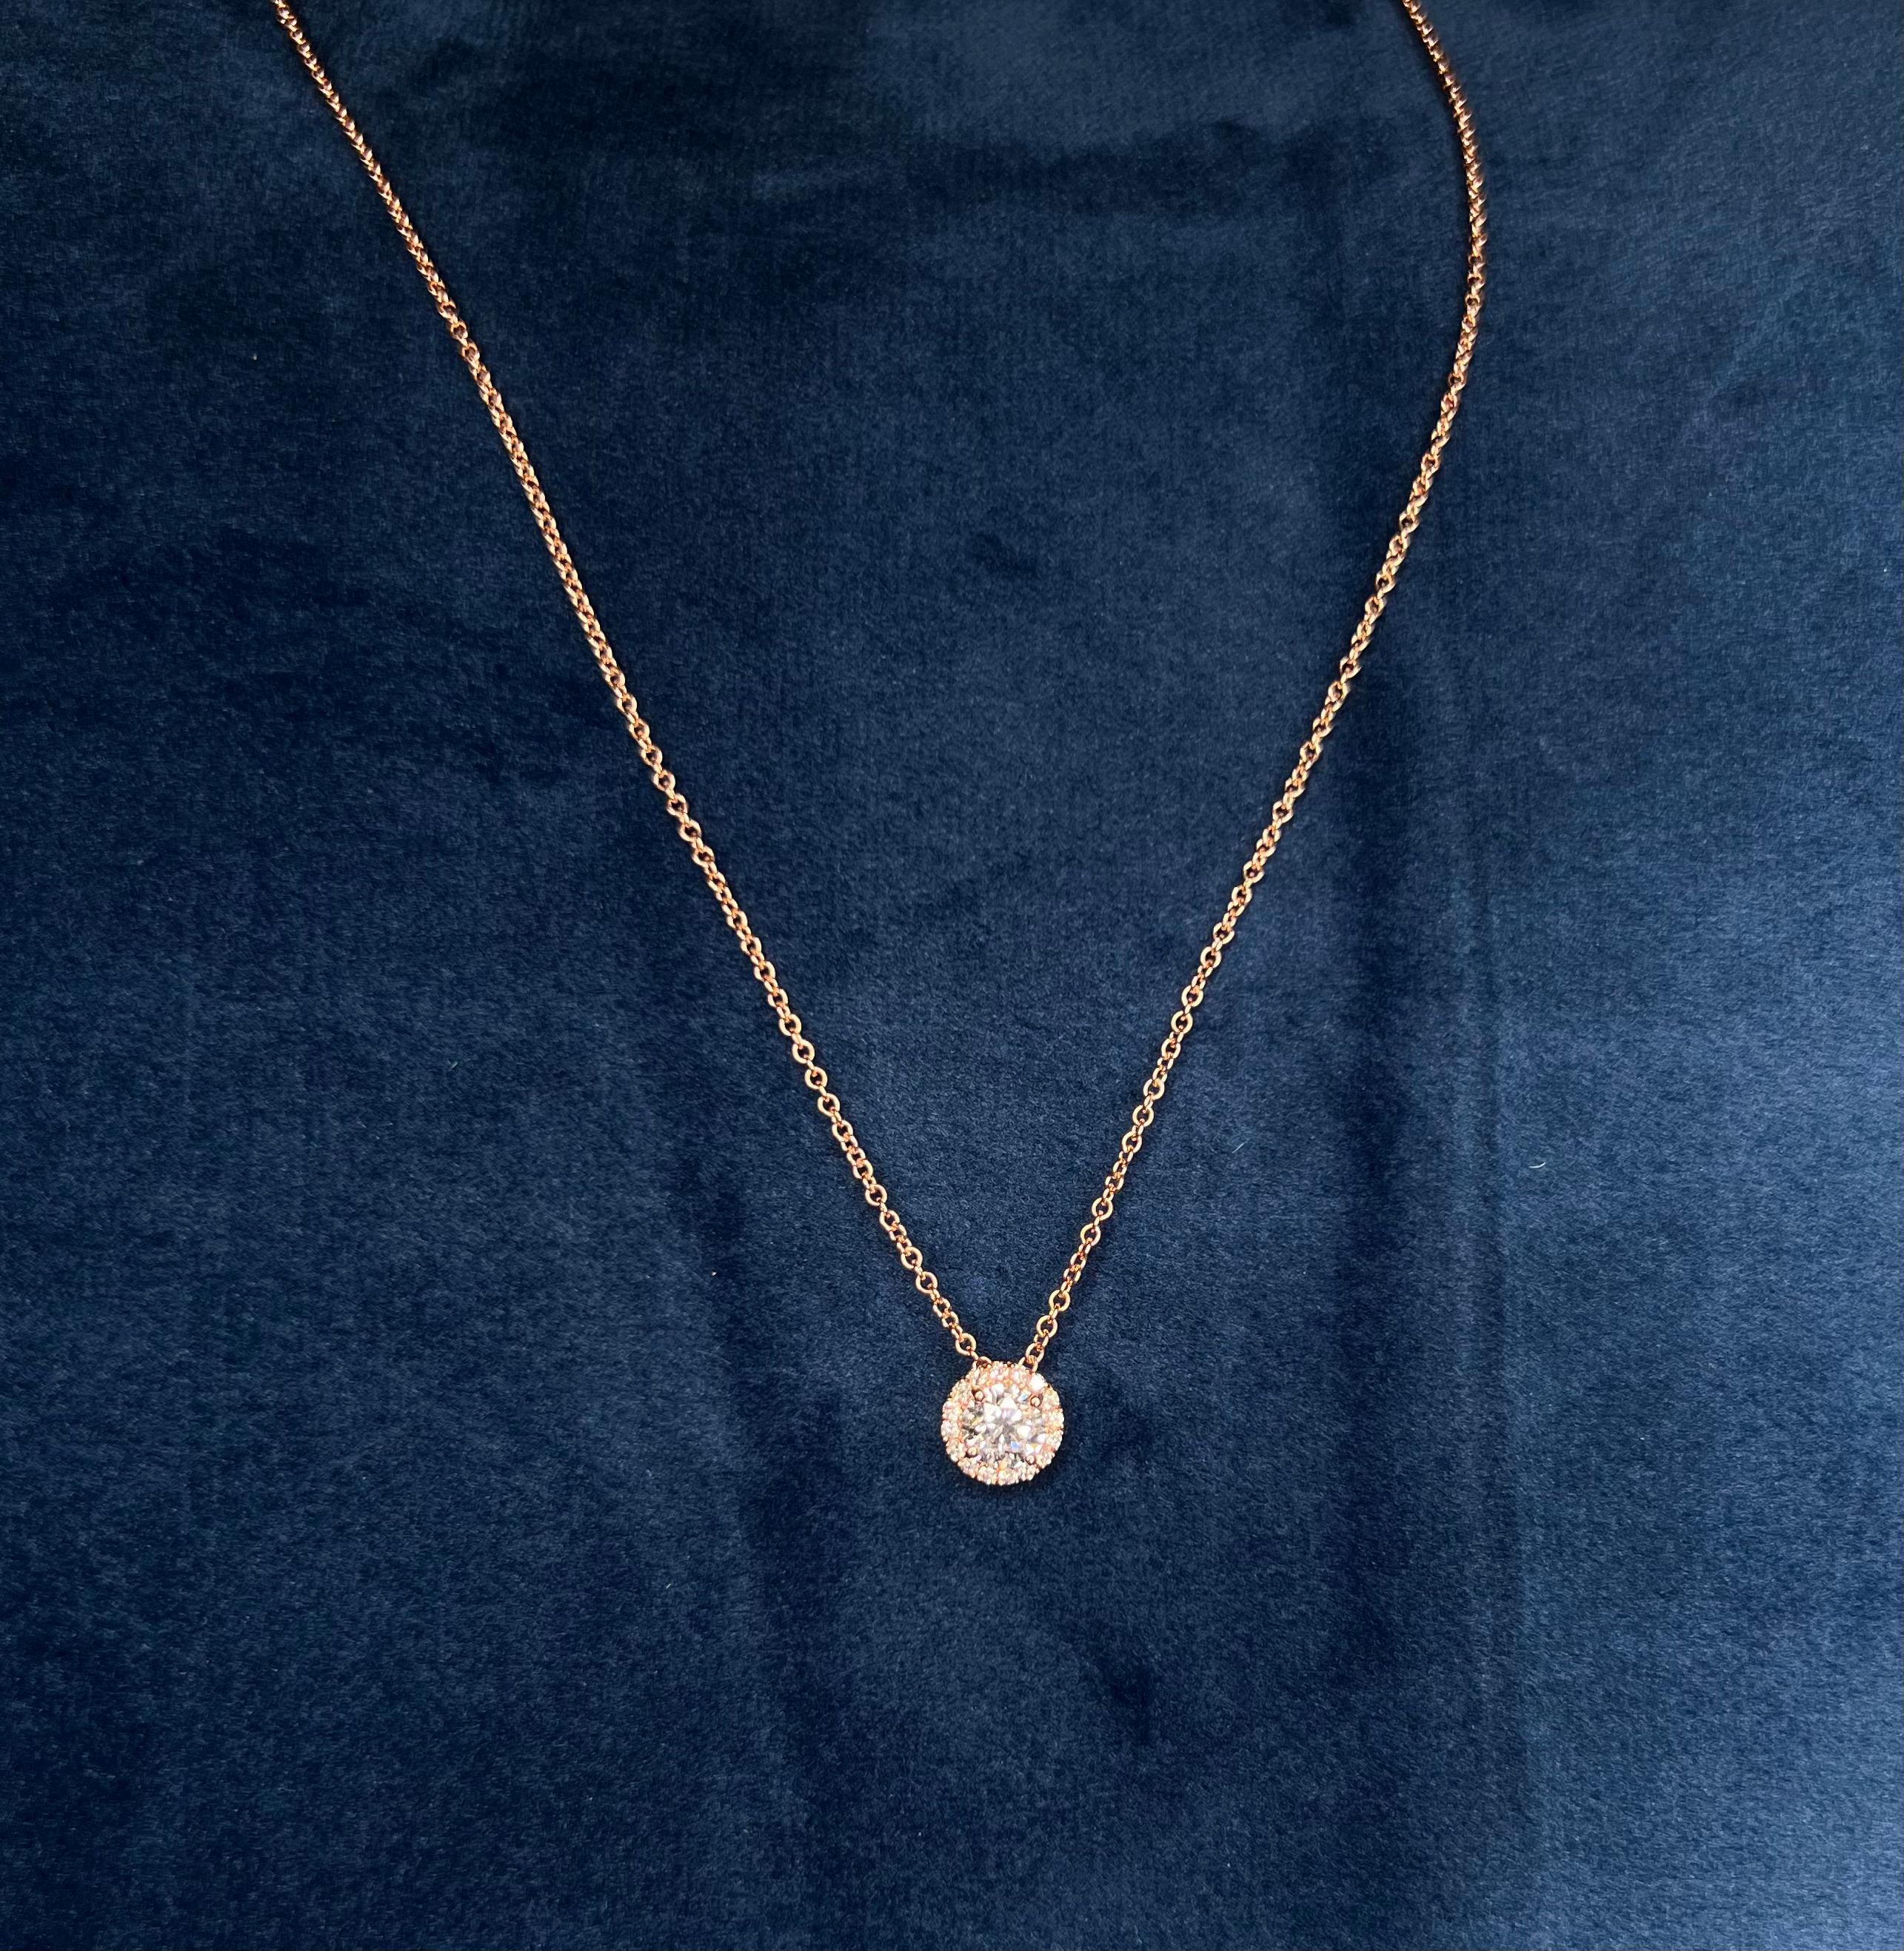 17 vs 20 inch necklace